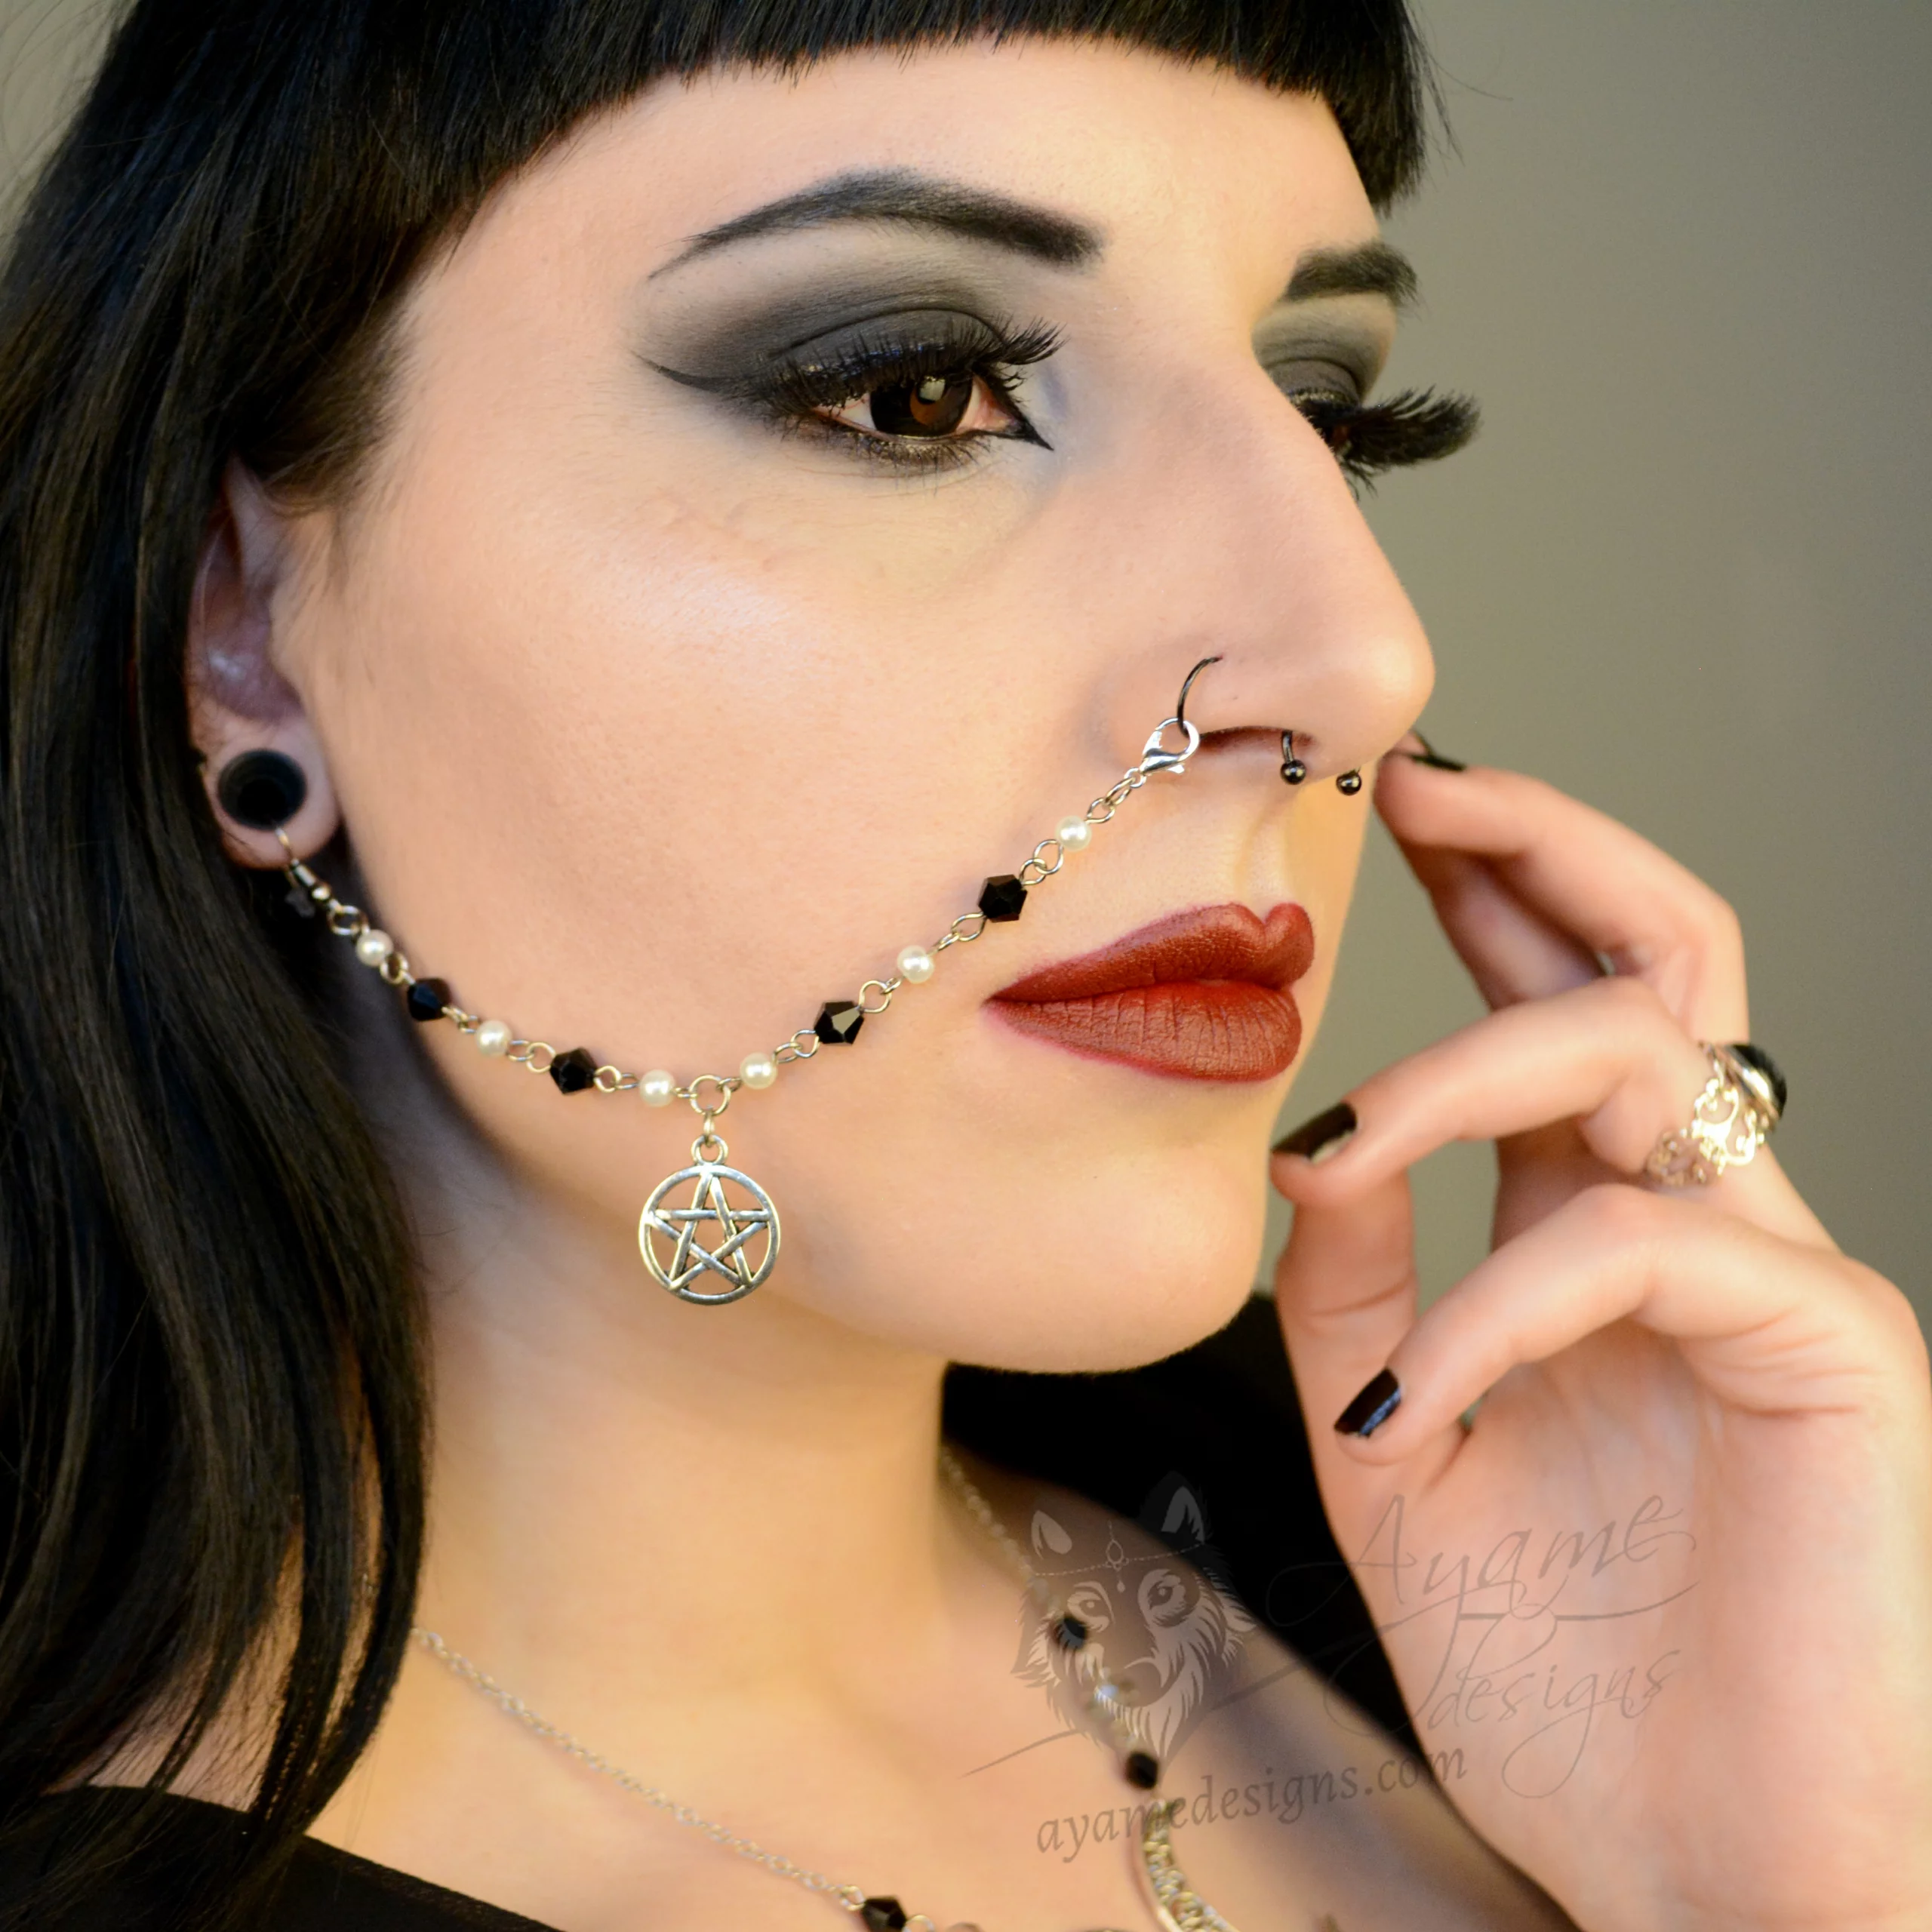 Handmade nose to ear chain with a pentacle charm, black Austrian crystal beads and white glass pearl beads